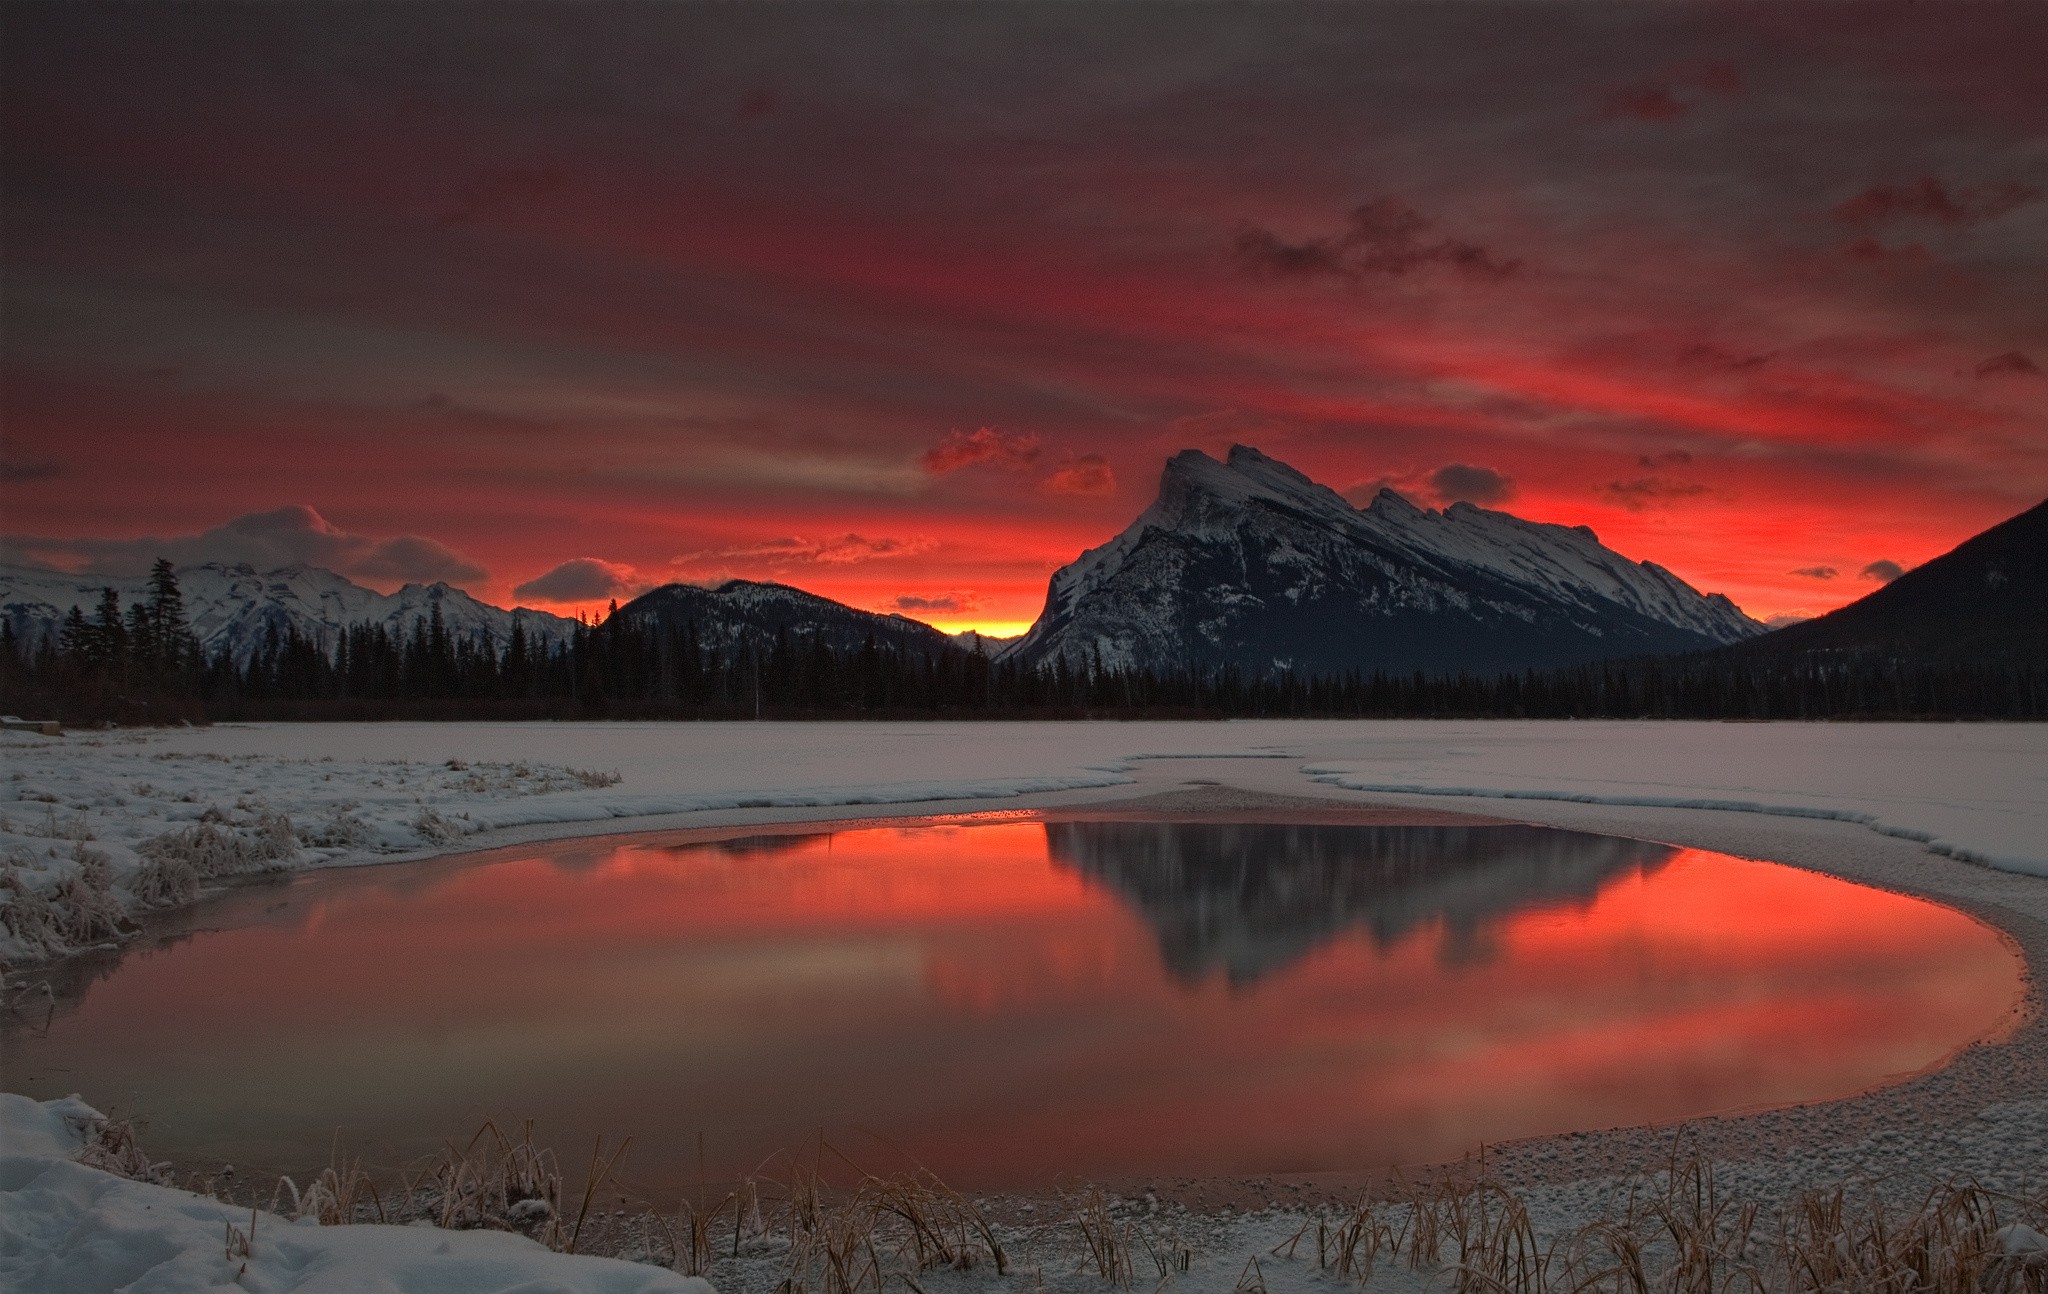 General 2048x1294 landscape mountains lake snow nature dusk sky red sky reflection winter cold outdoors ice water